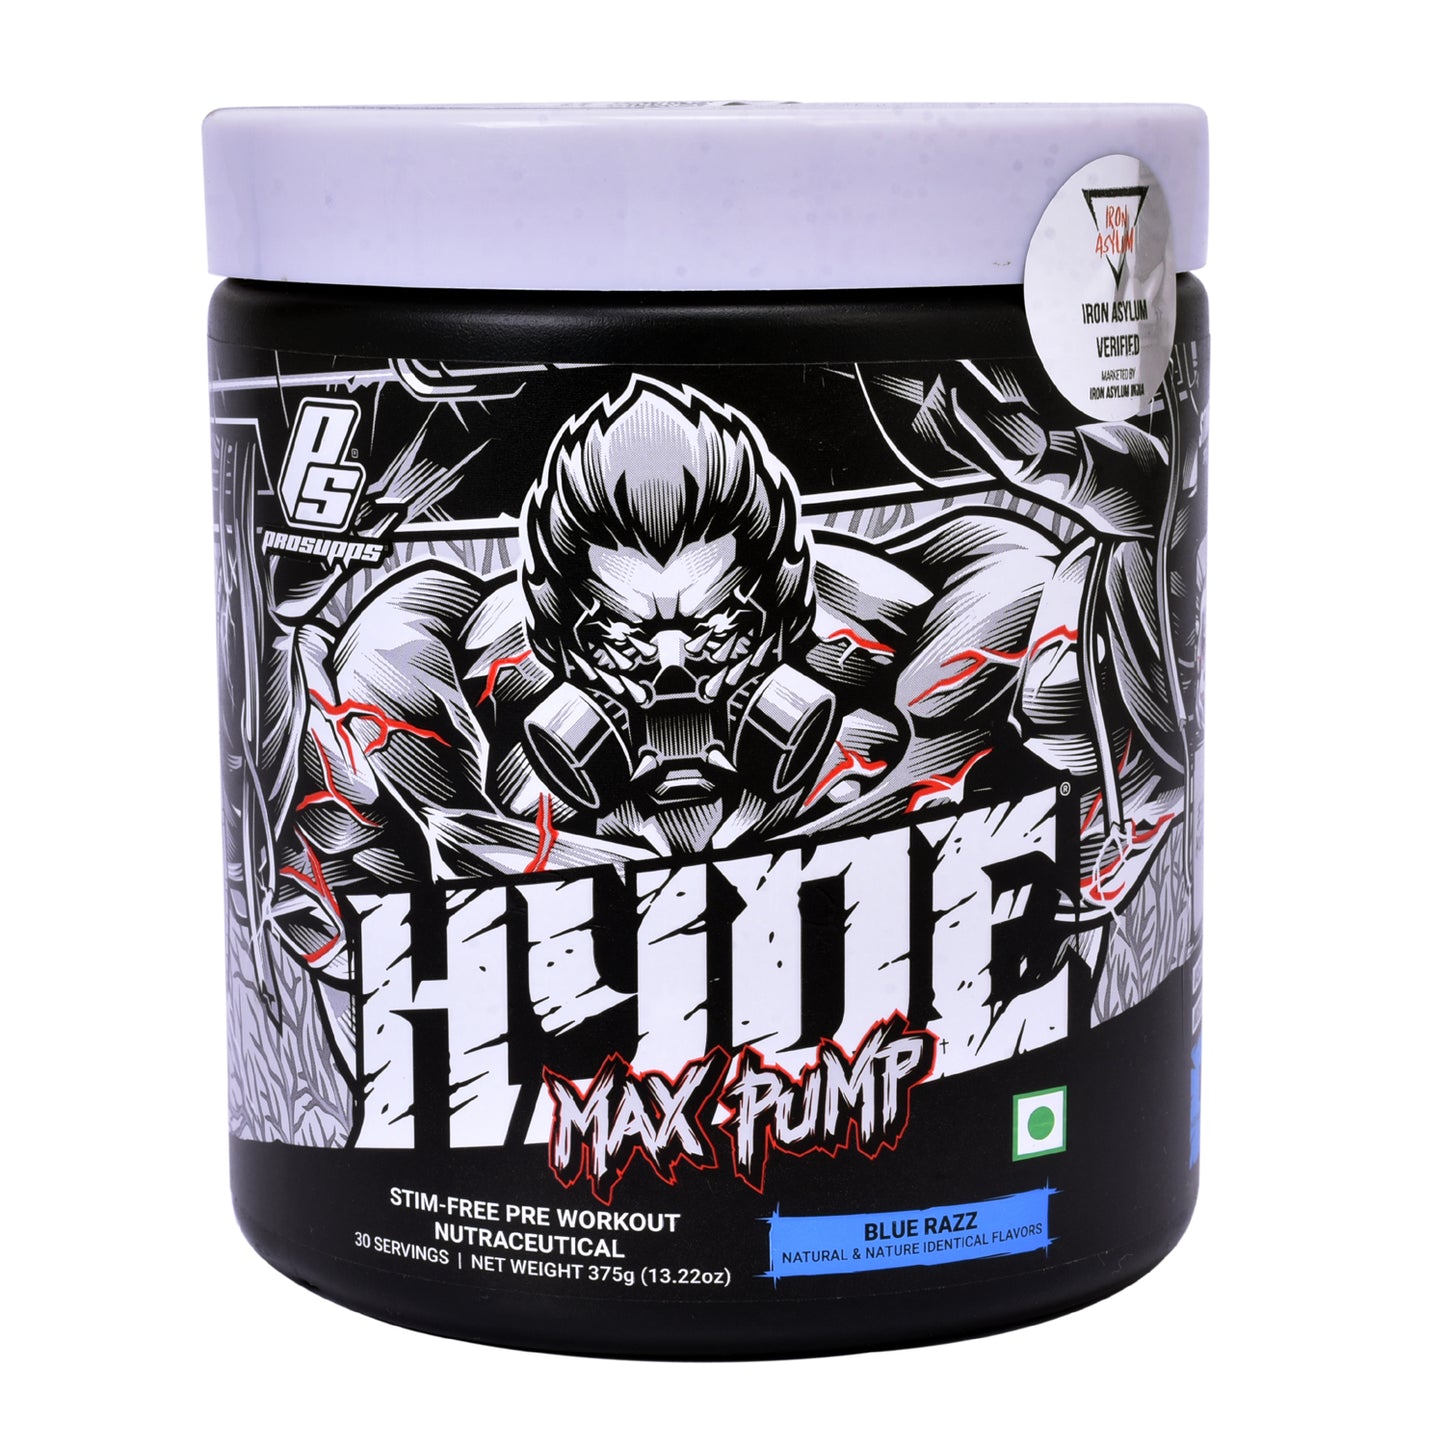 ProSupps Hyde Max Pump, Stim-Free Pre-Workout, 30 Servings